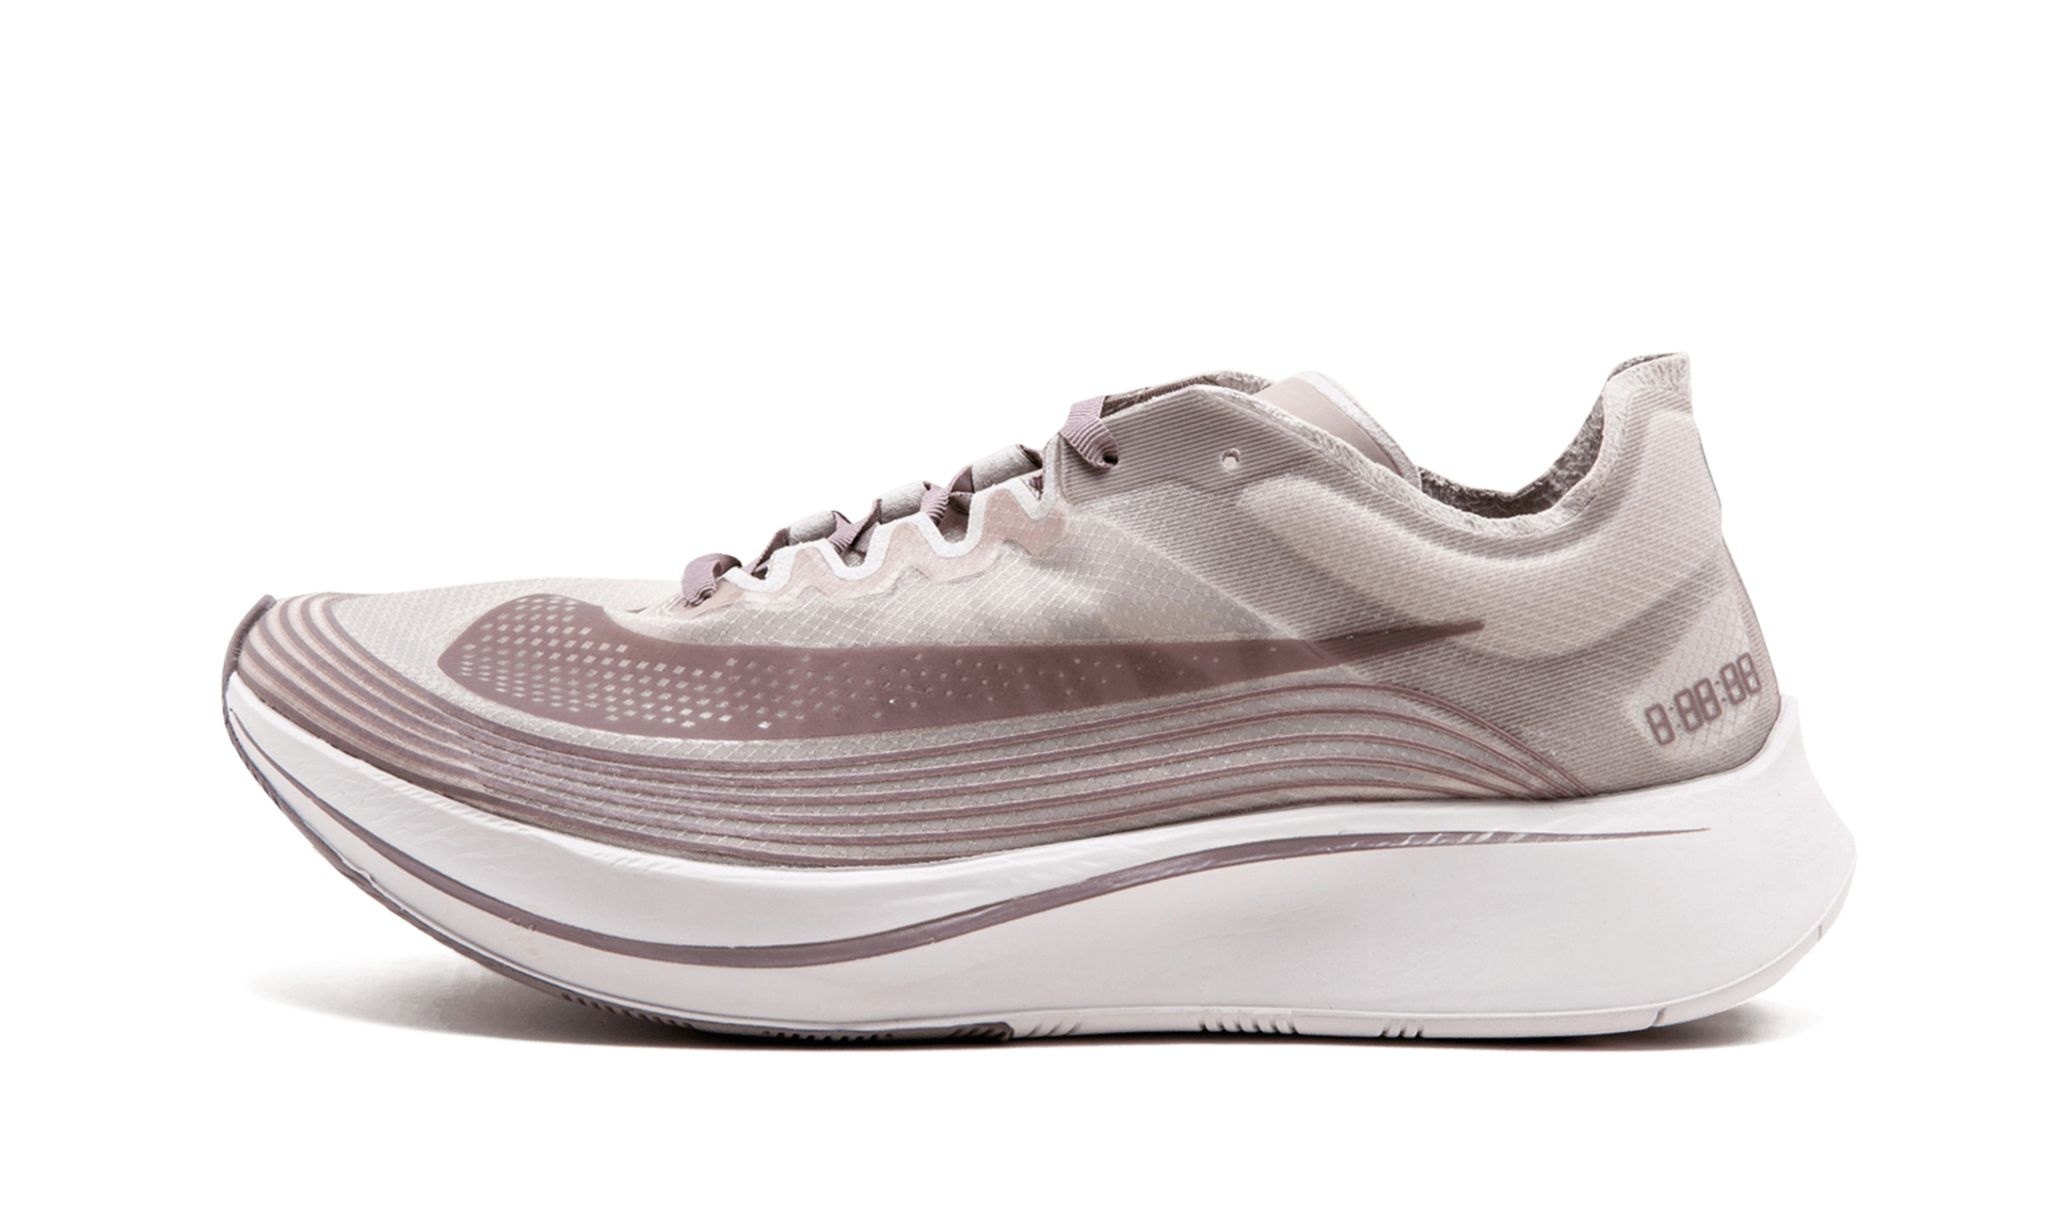 Lab Zoom Fly SP "Chicago" - 1